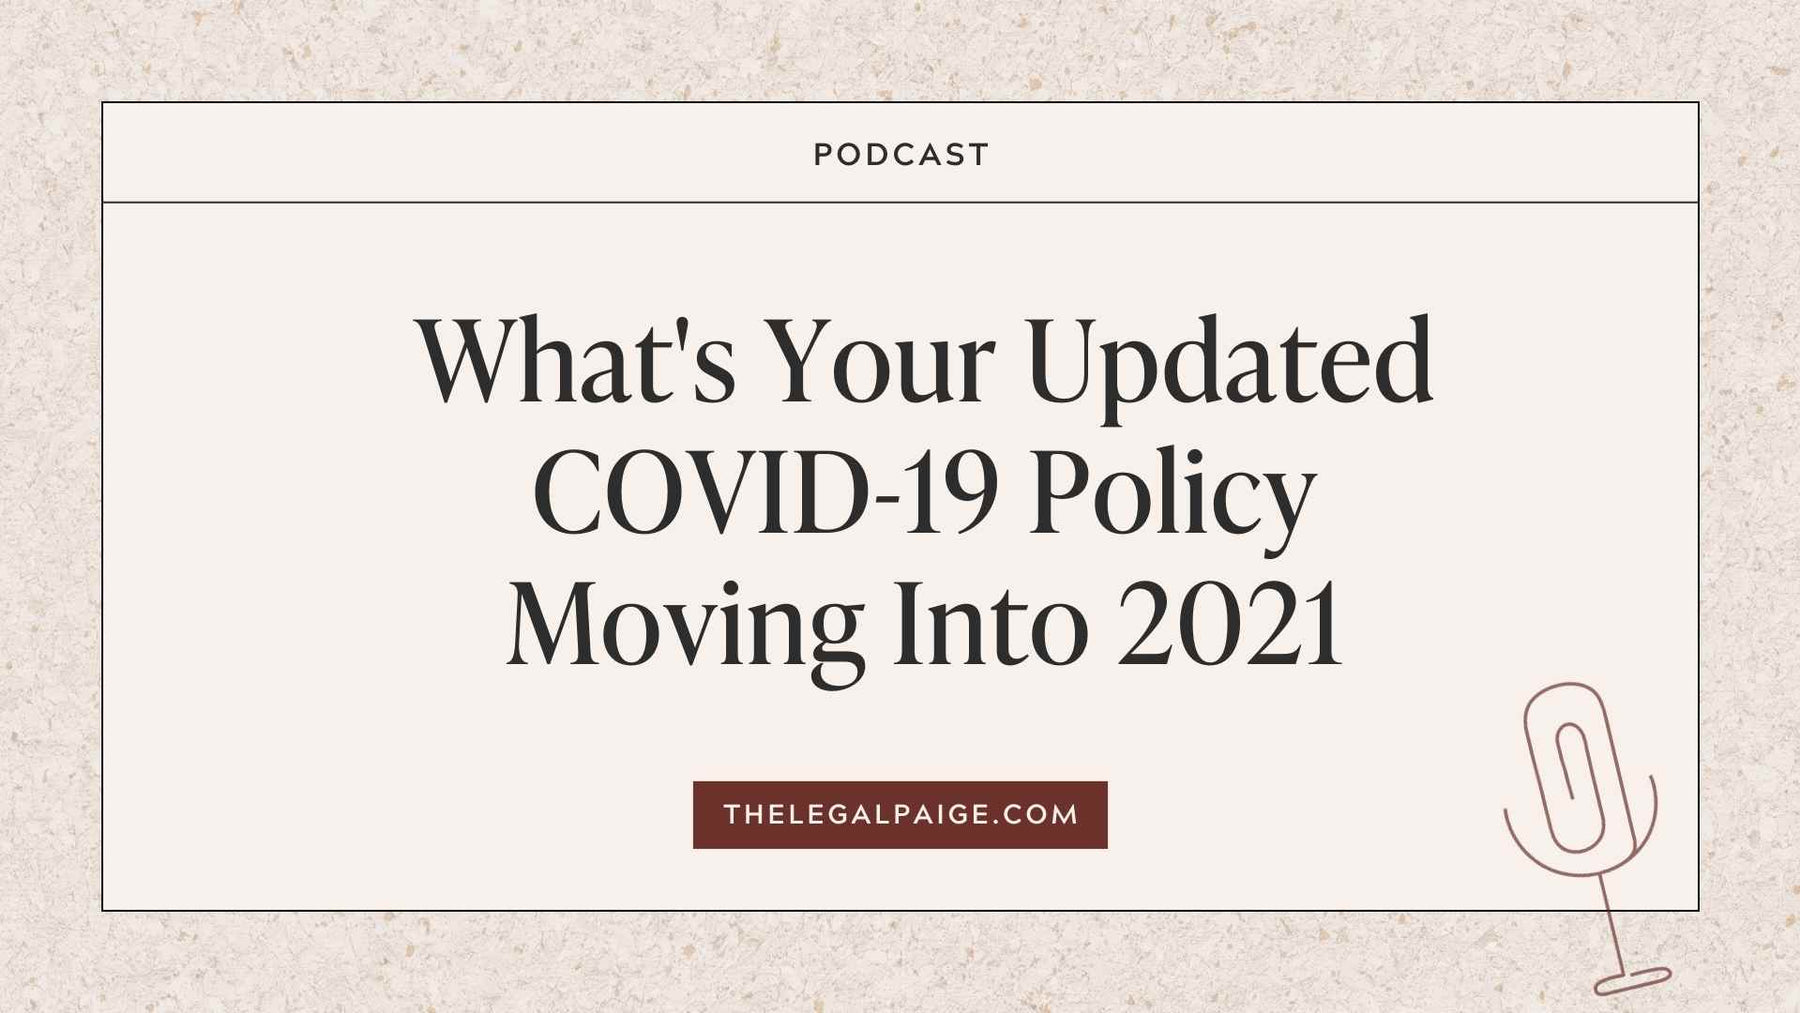 Episode 72: What's Your Updated COVID-19 Policy Moving Into 2021